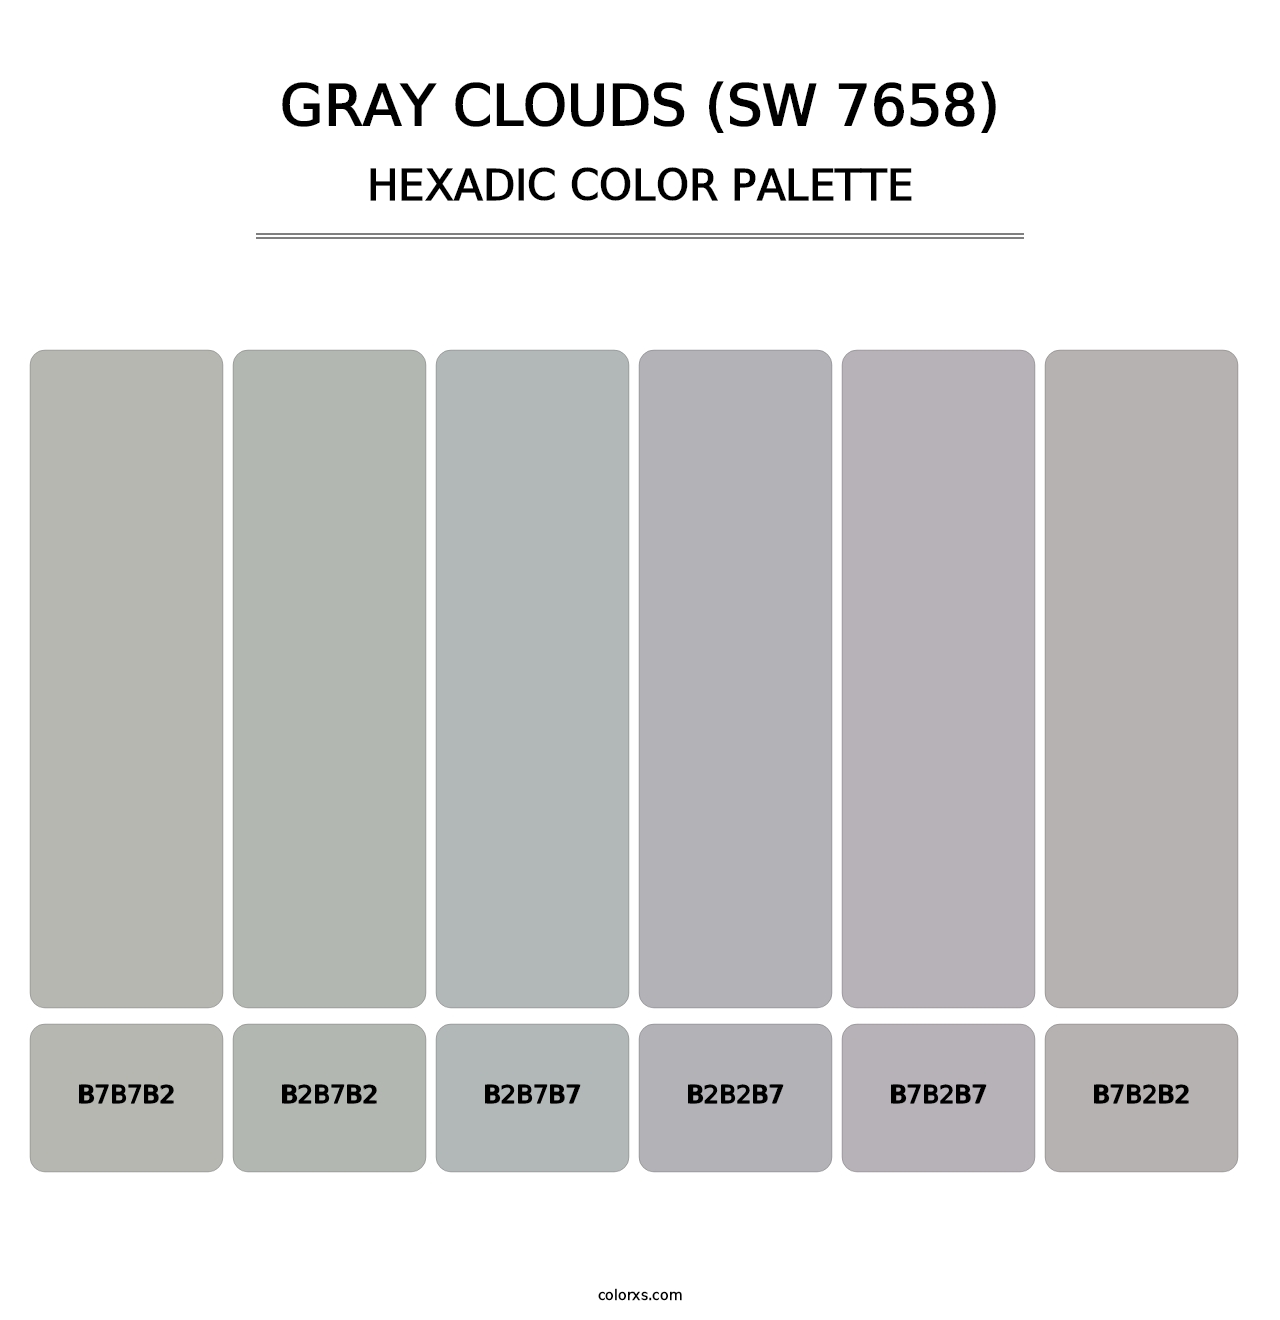 Gray Clouds (SW 7658) - Hexadic Color Palette